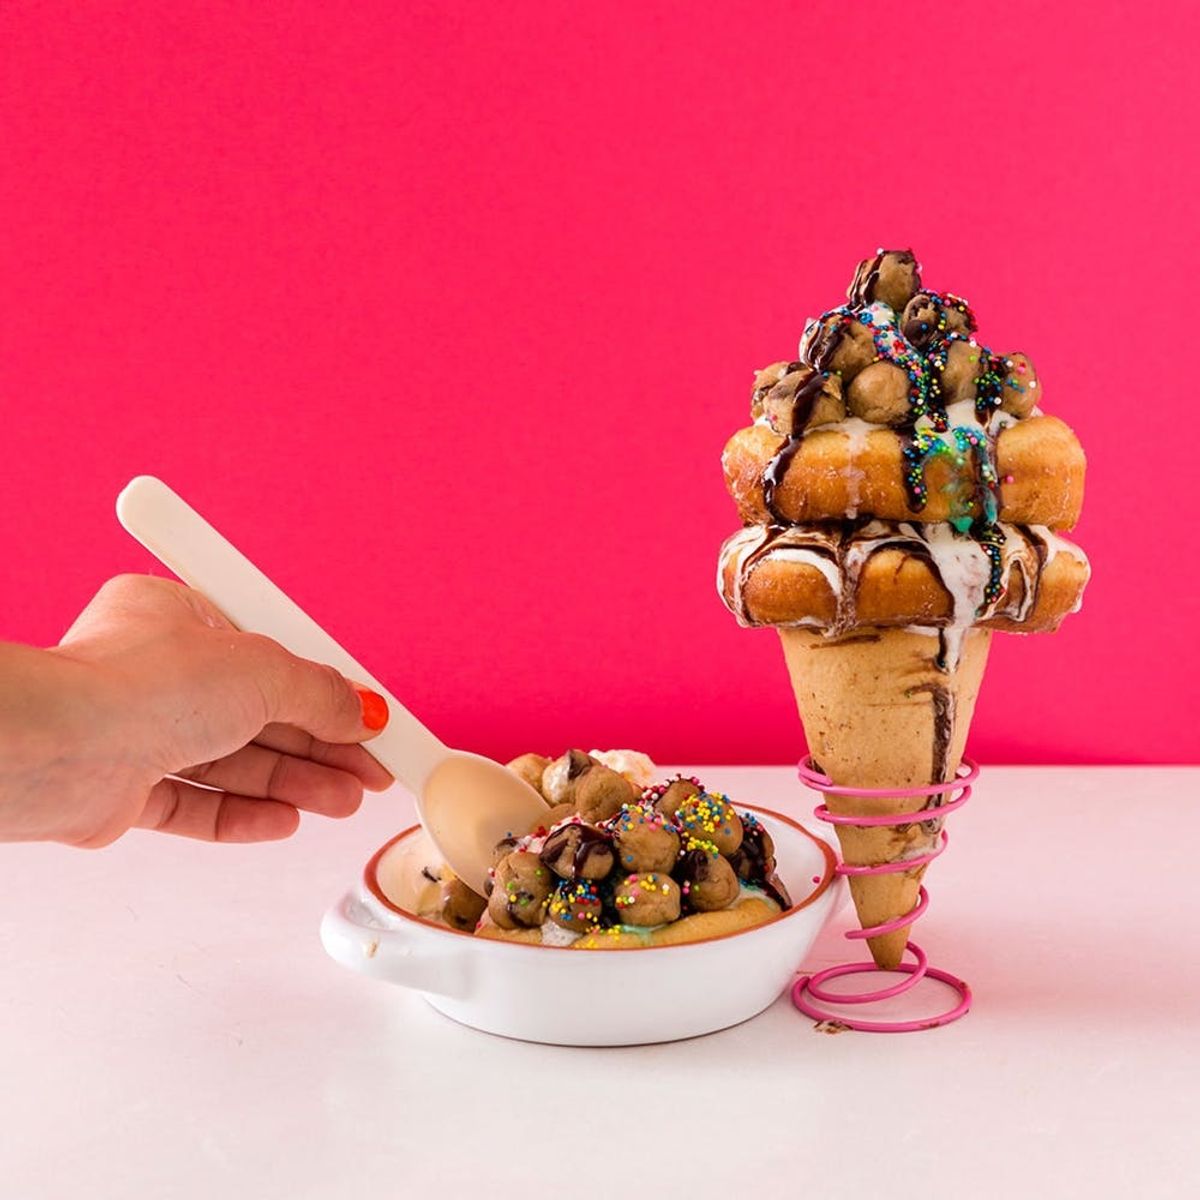 This Cookie Dough Donut Sundae Will Satisfy Everyone’s Sweet Tooth